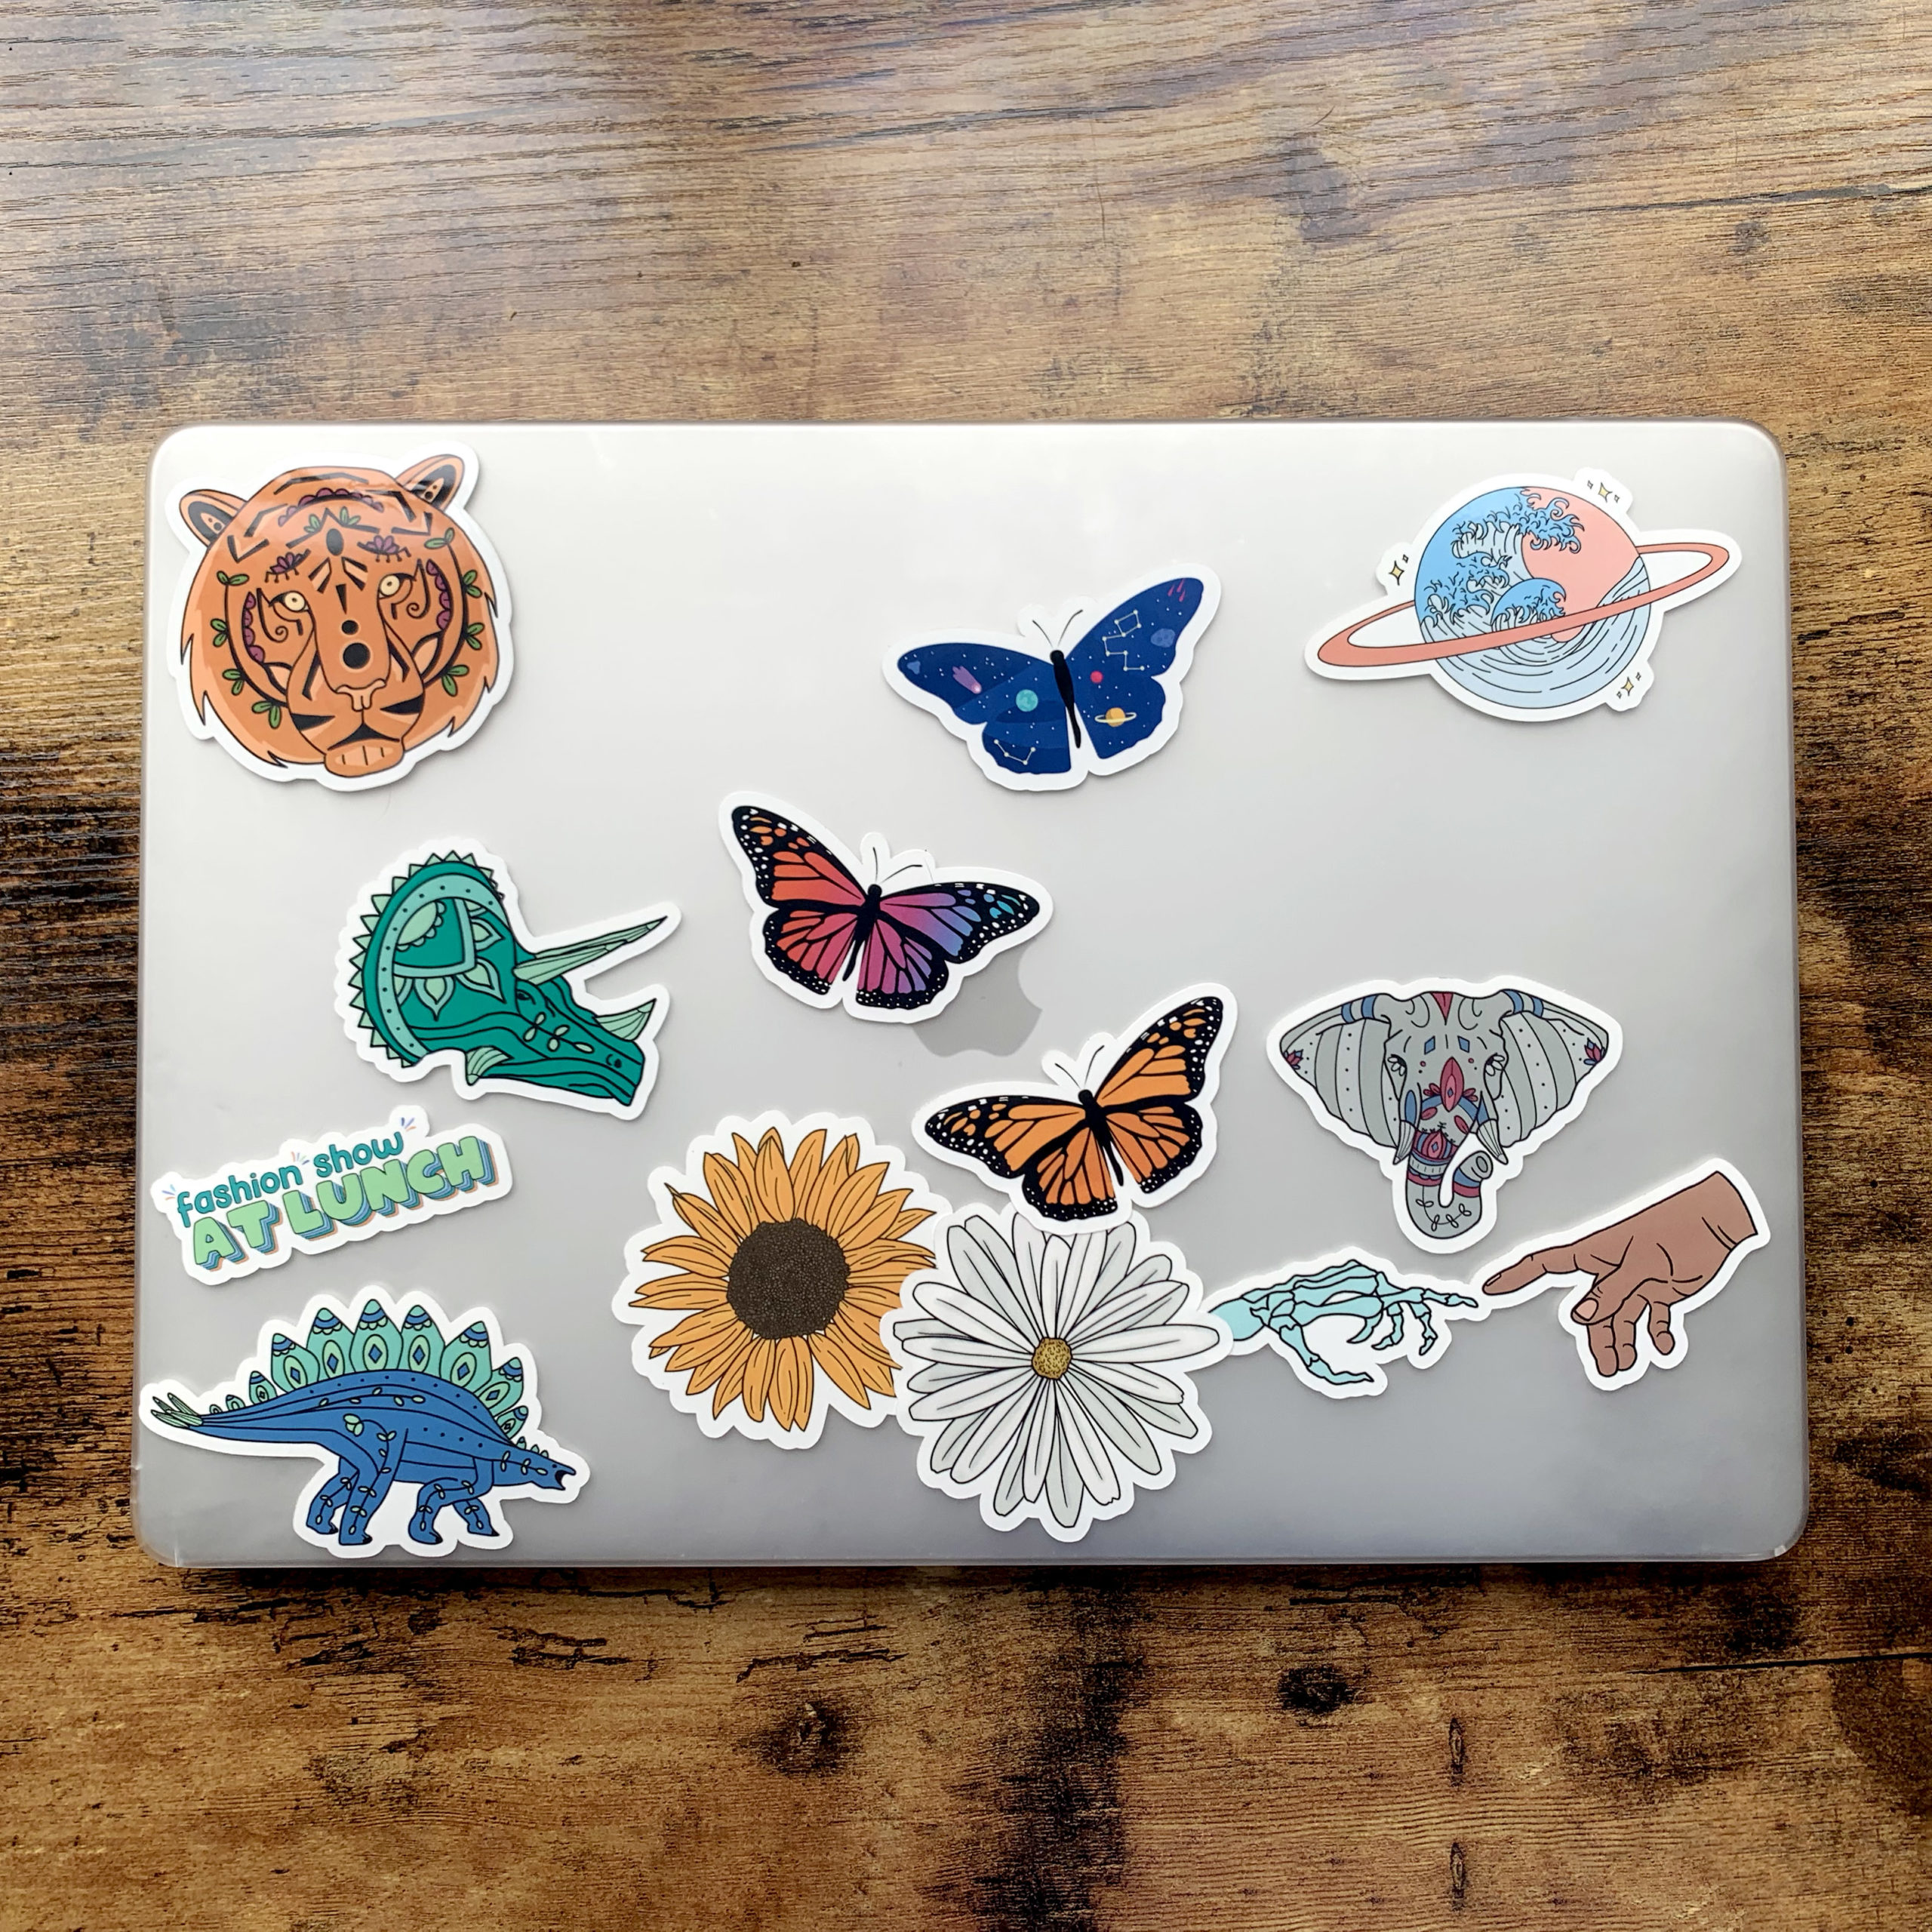 Variety of Super Cute Stickers on Laptop Sitting on Desk